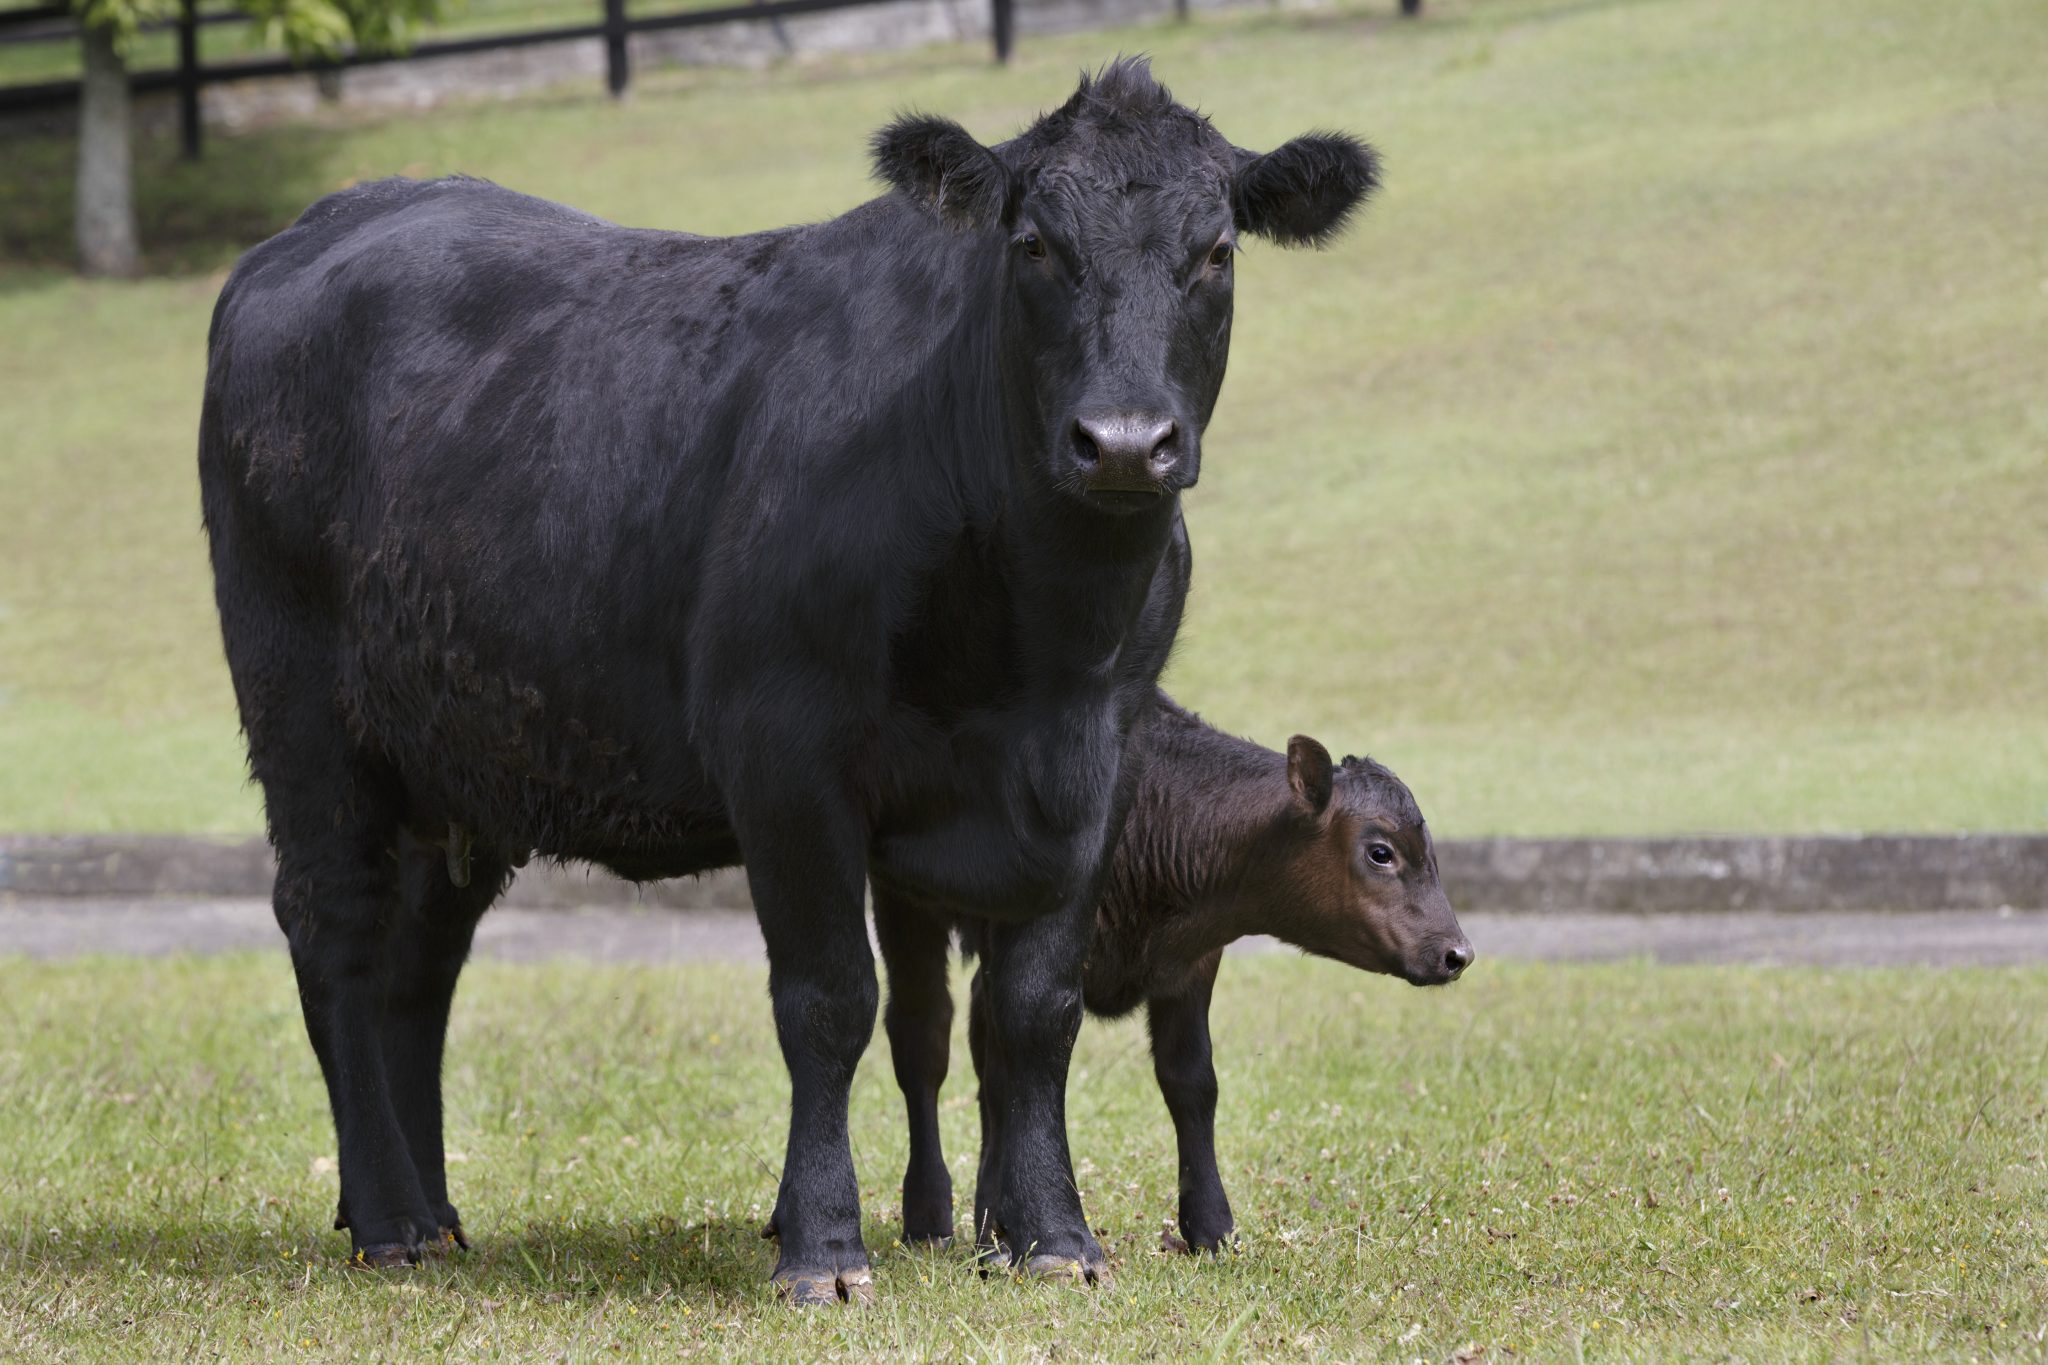 Black cow and calf pair standing in a pasture.